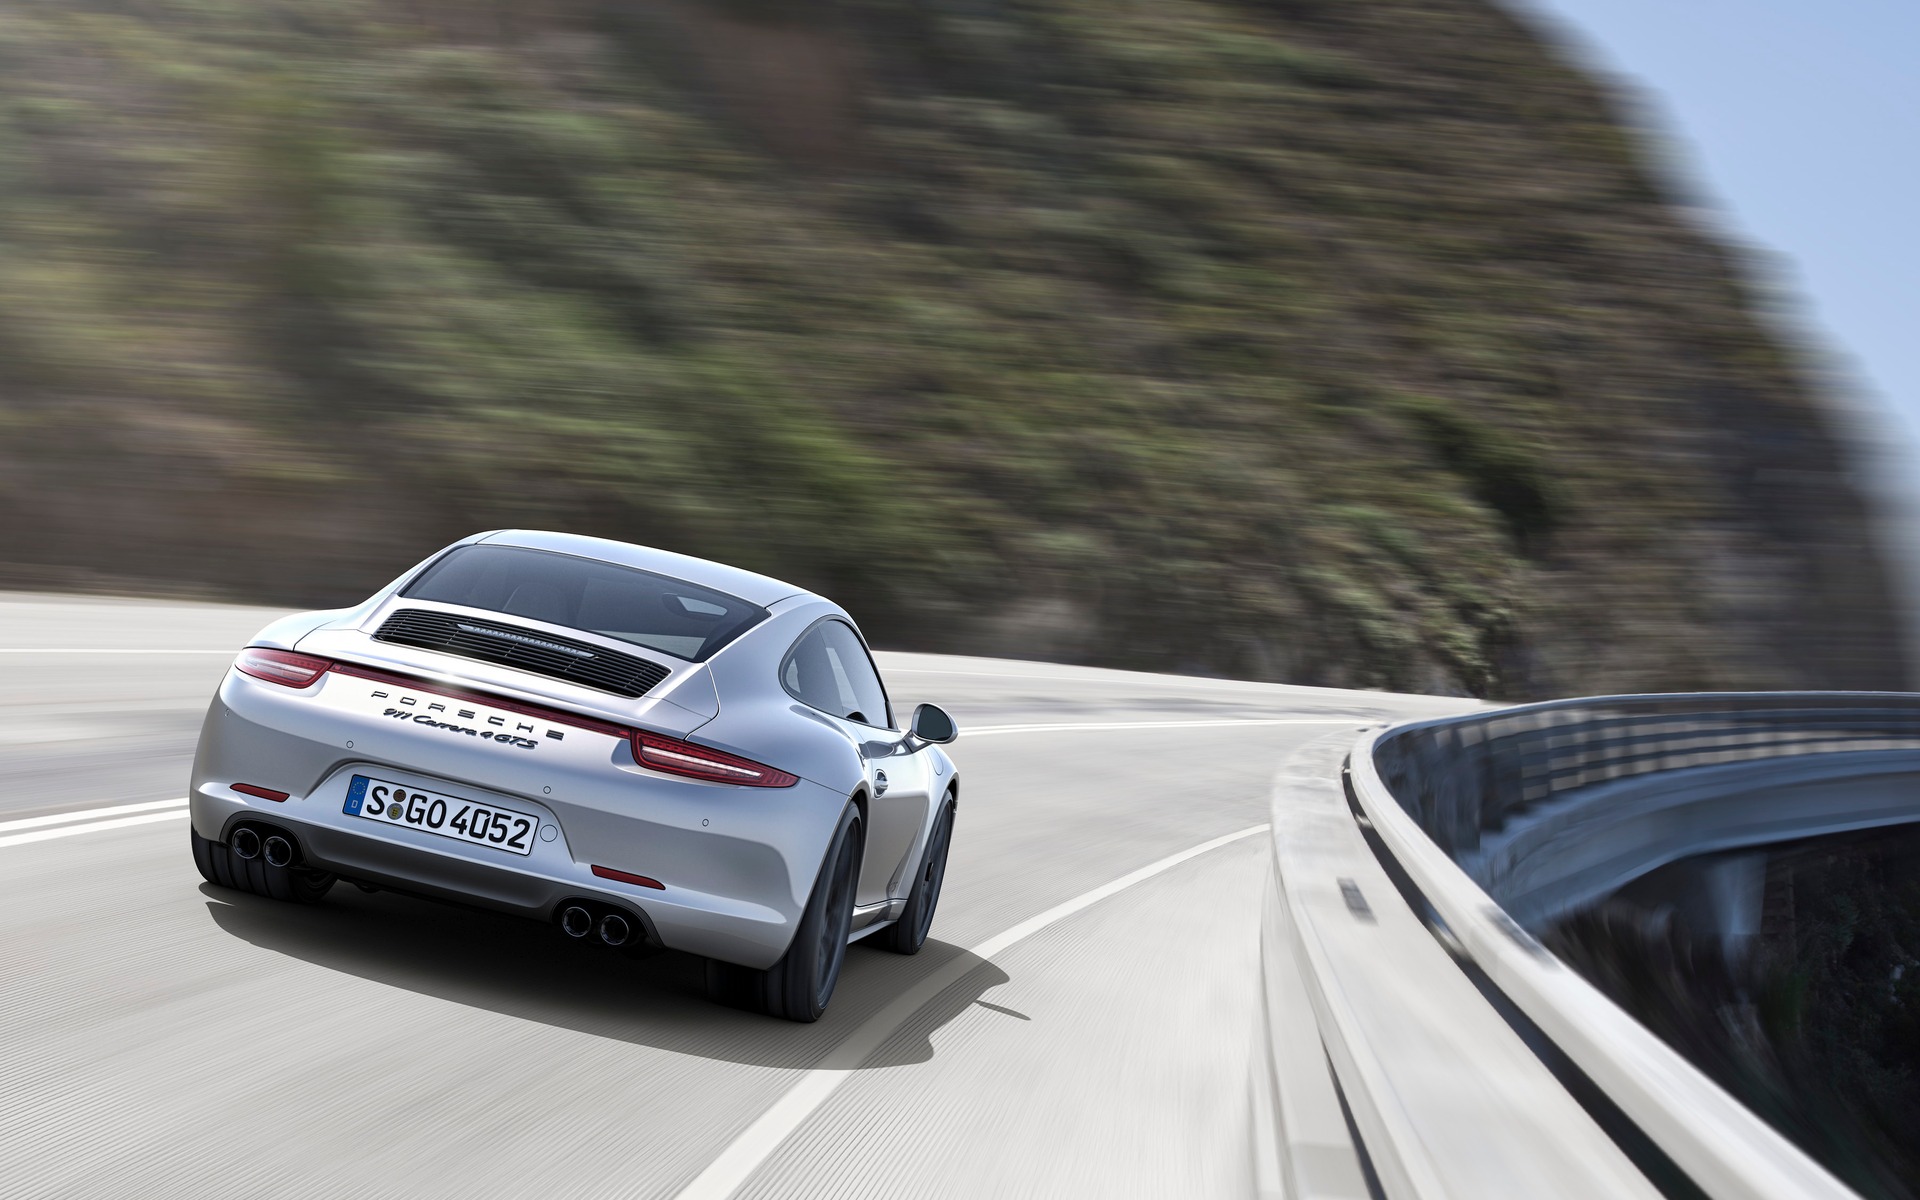 Porsche claims a 0-100 km/h time of four seconds.